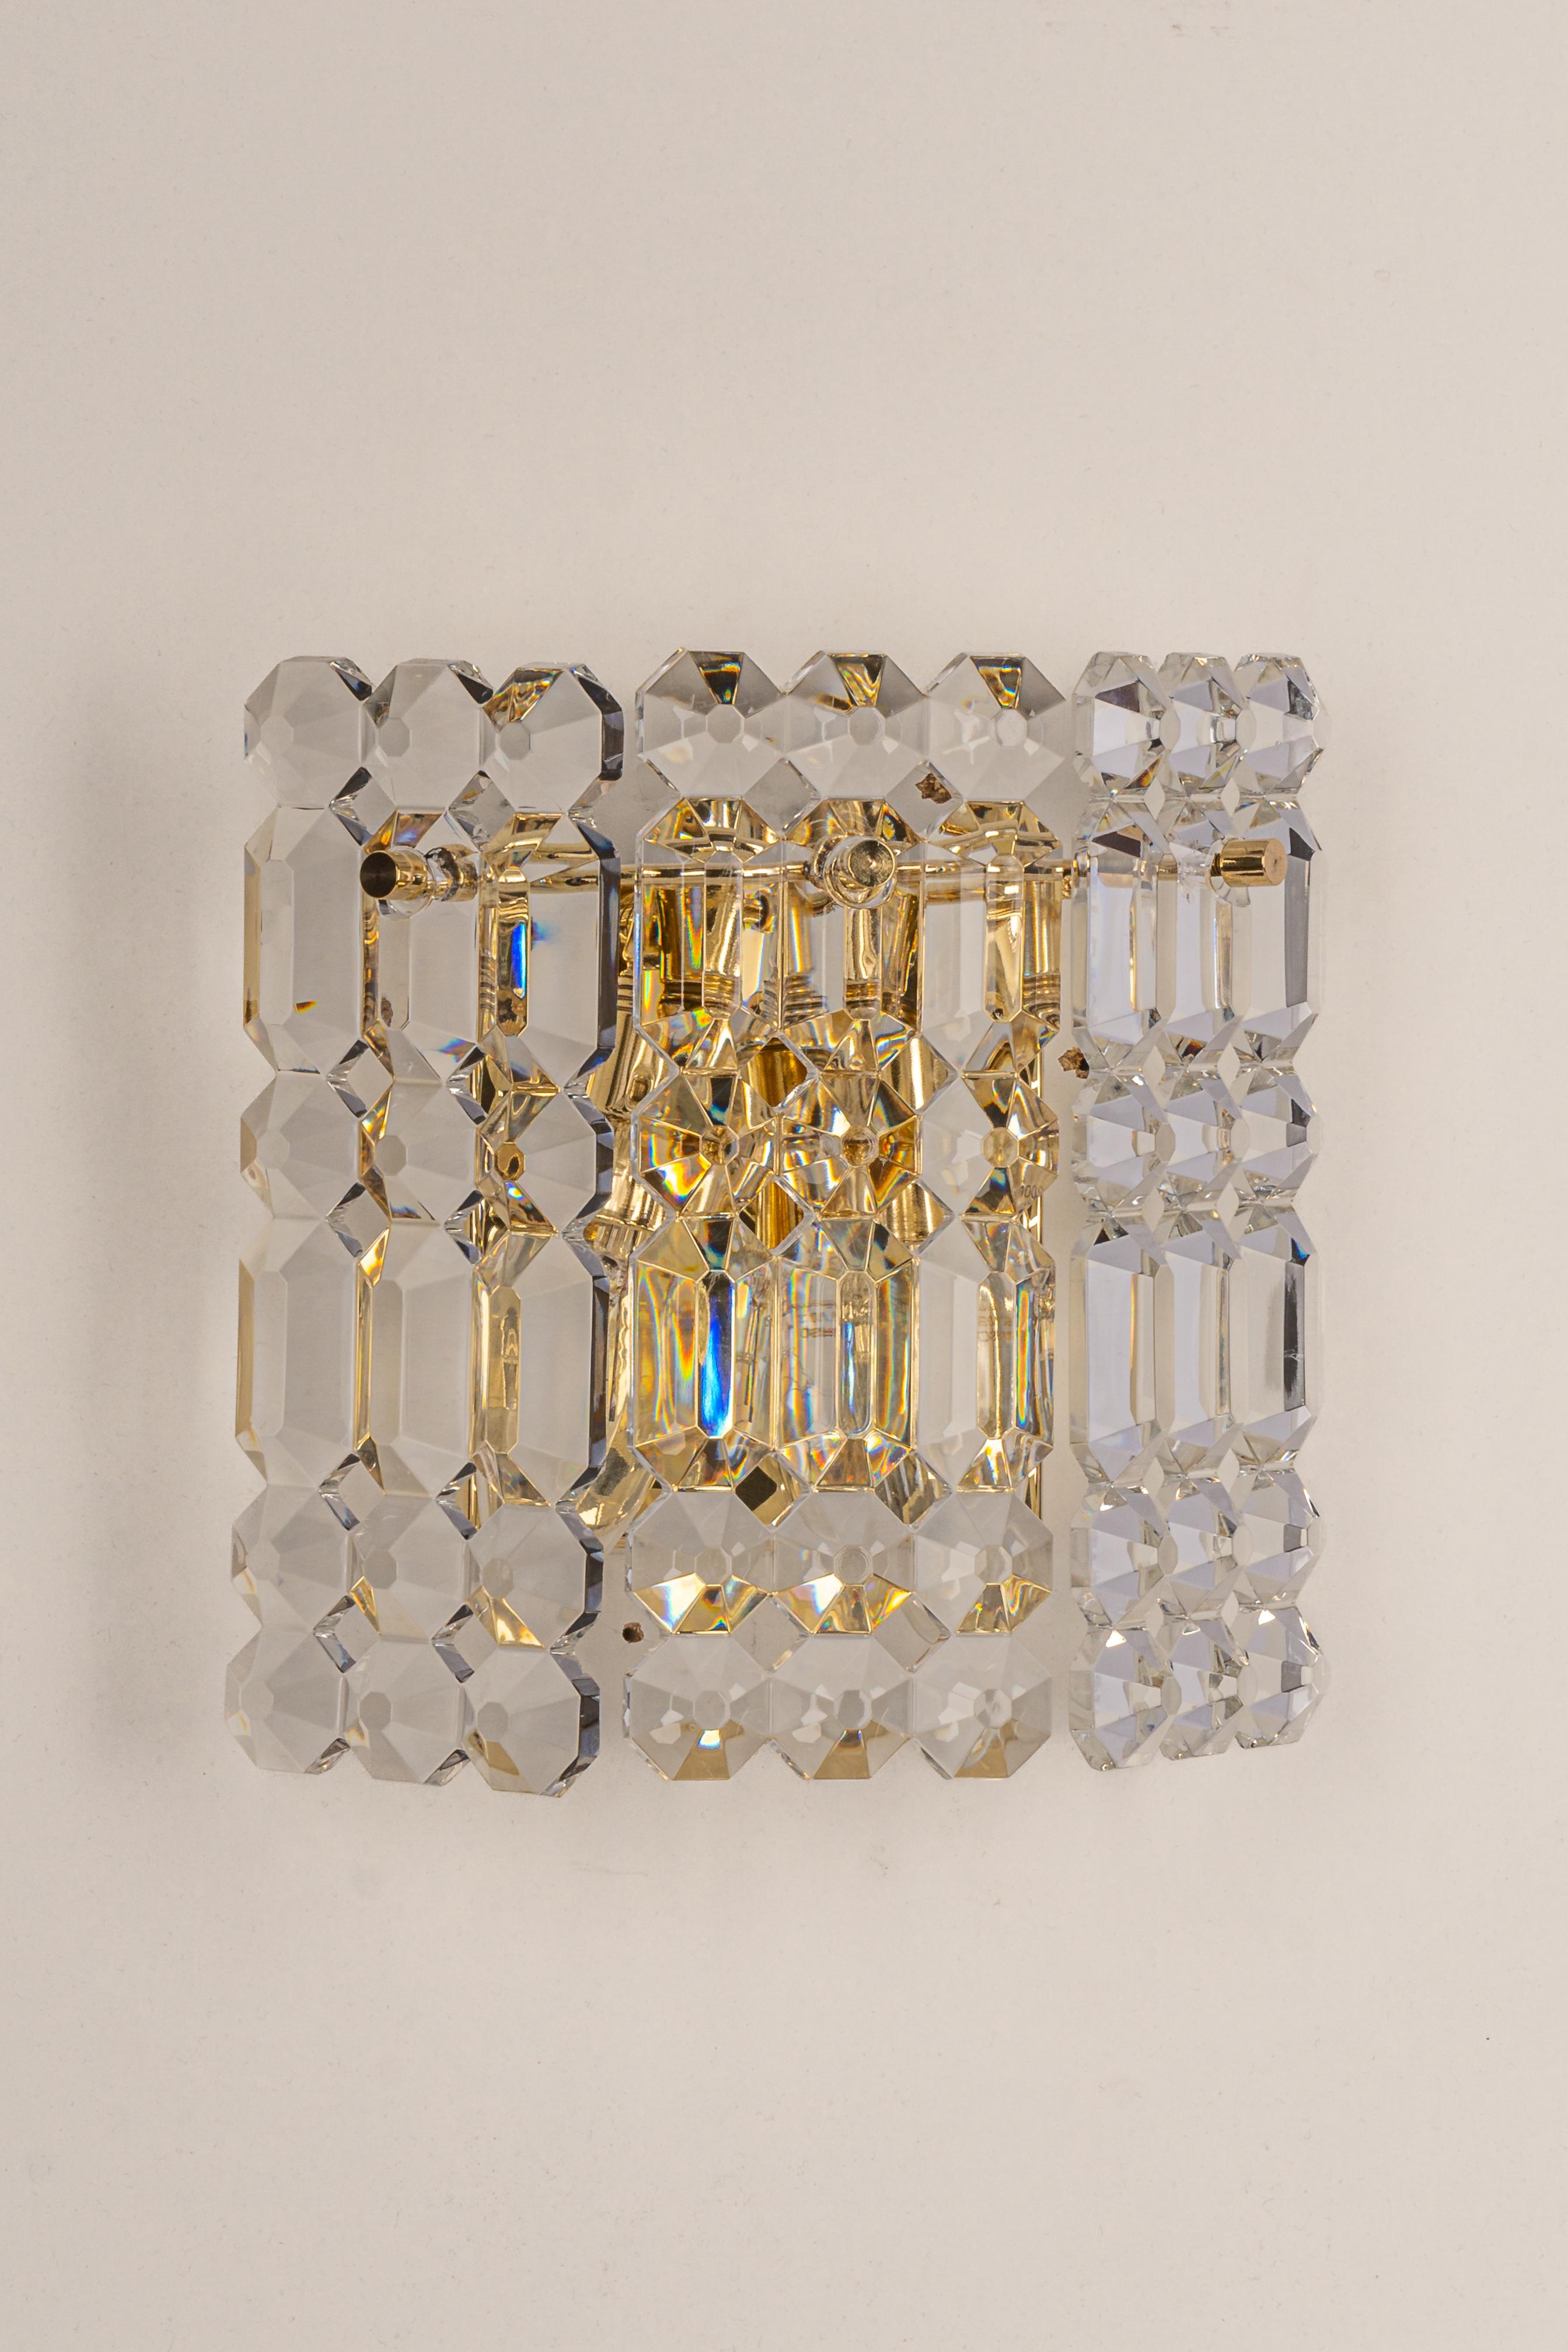 A stunning pair of golden sconces with crystal glasses, made by Kinkeldey, Germany, circa 1970-1979. It’s composed of crystal glass pieces on a brass frame.

Best of the 1970s from Germany.
High quality and in very good condition. Cleaned,